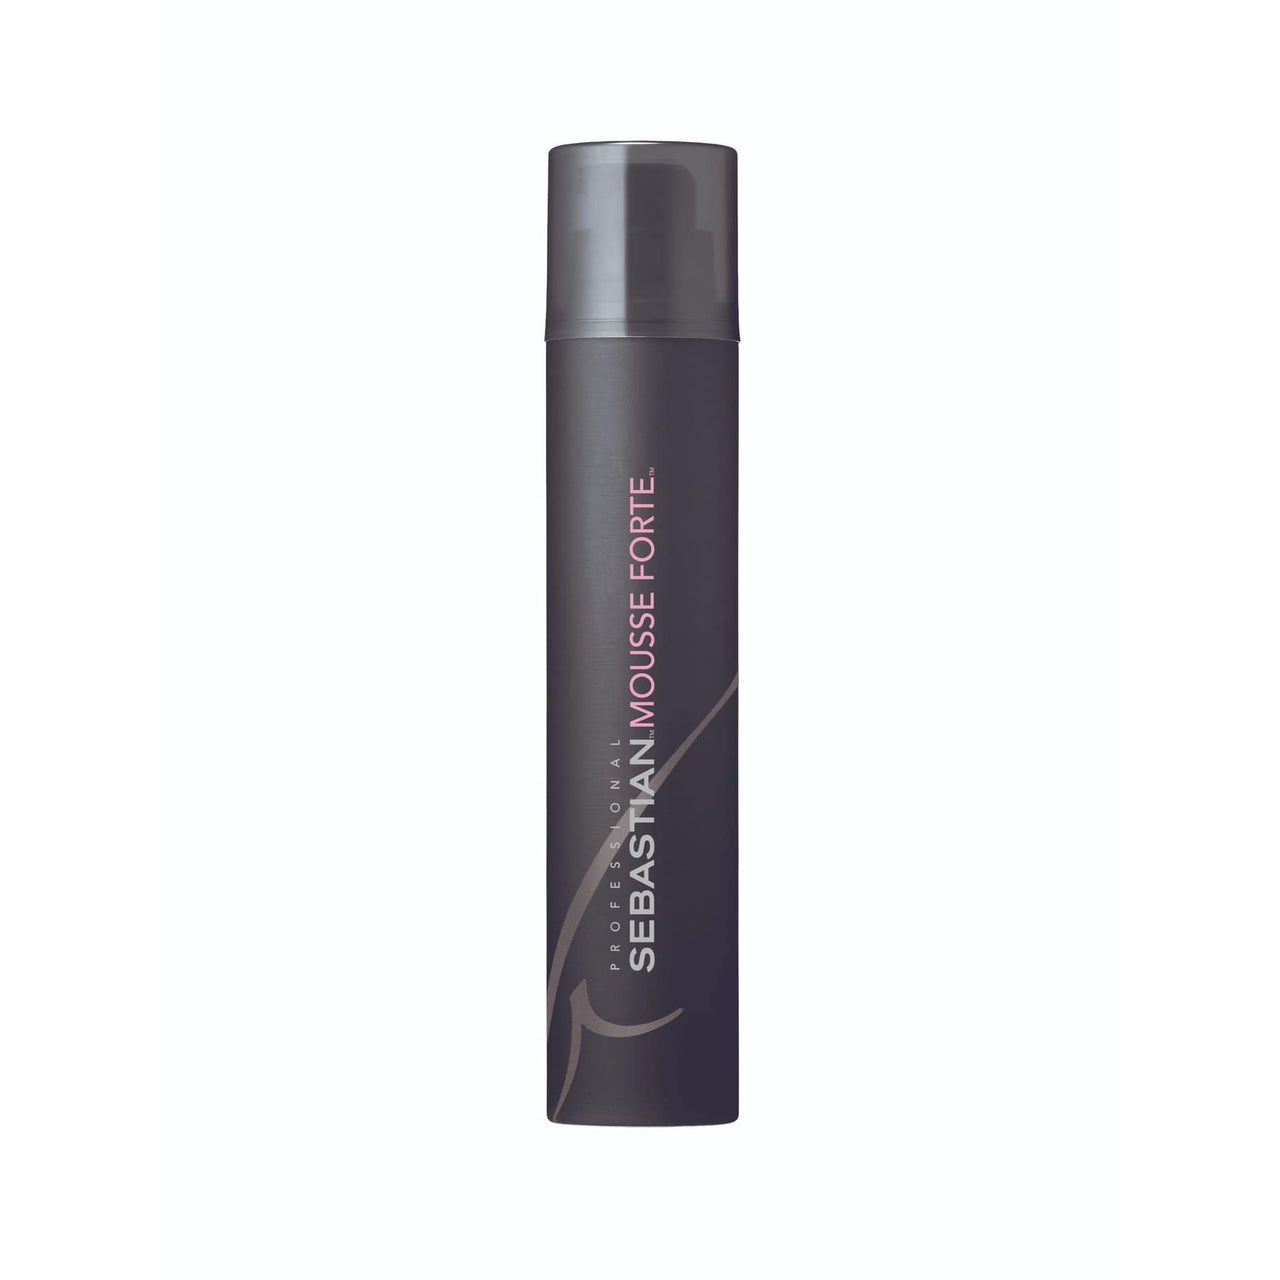 SEBASTIAN_MOUSSE FORTE Strong Hold Mousse 200g_Cosmetic World